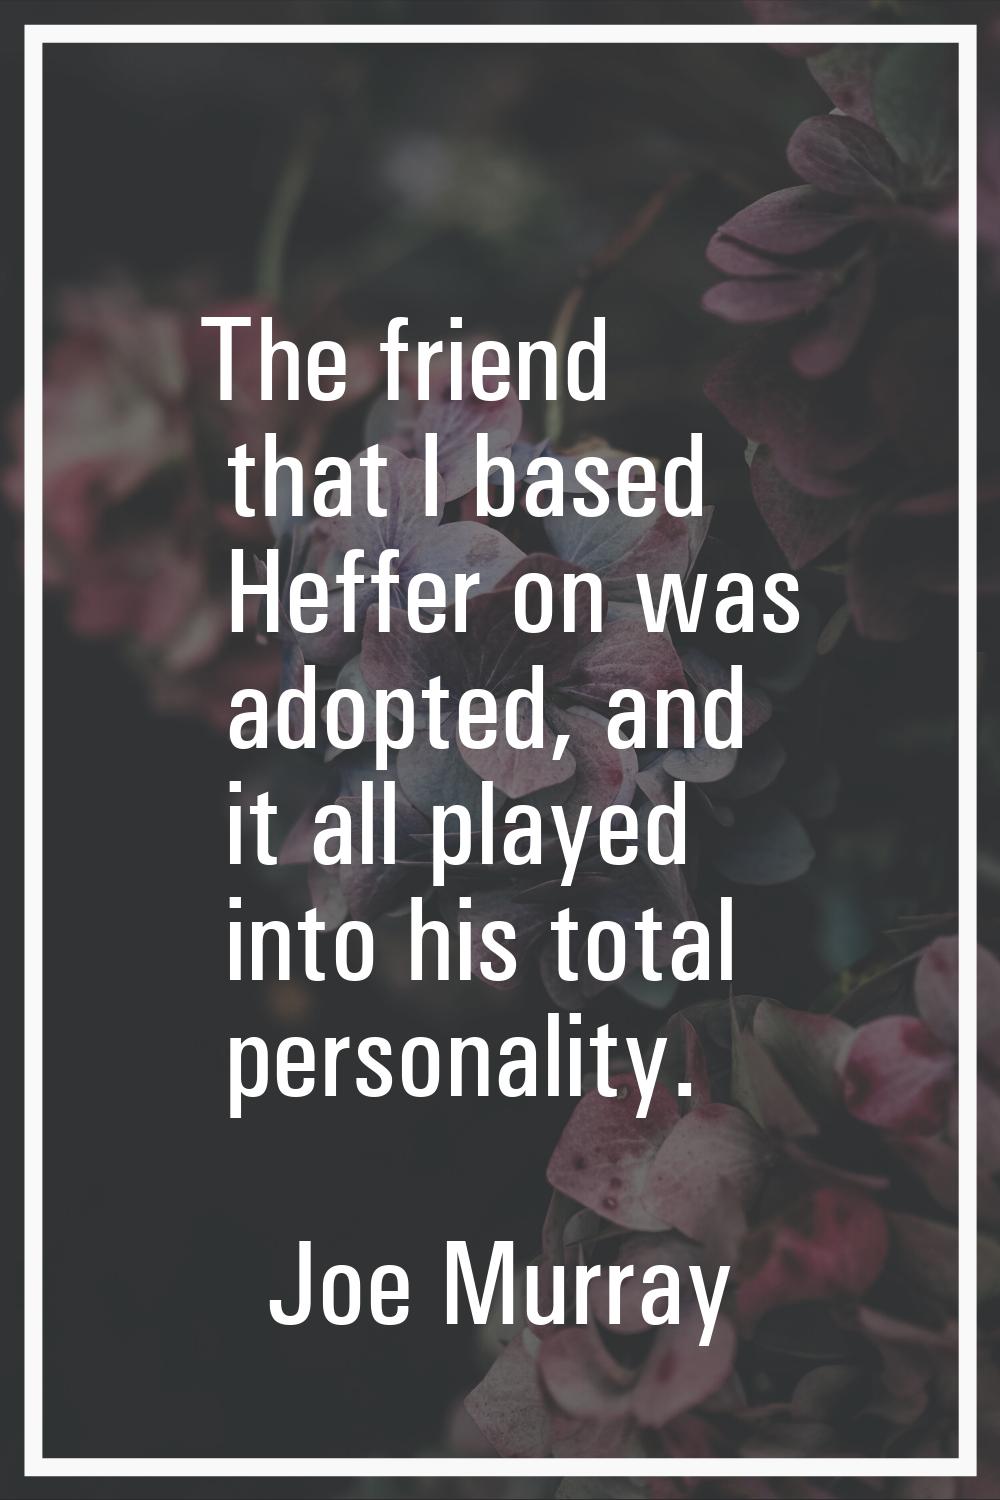 The friend that I based Heffer on was adopted, and it all played into his total personality.